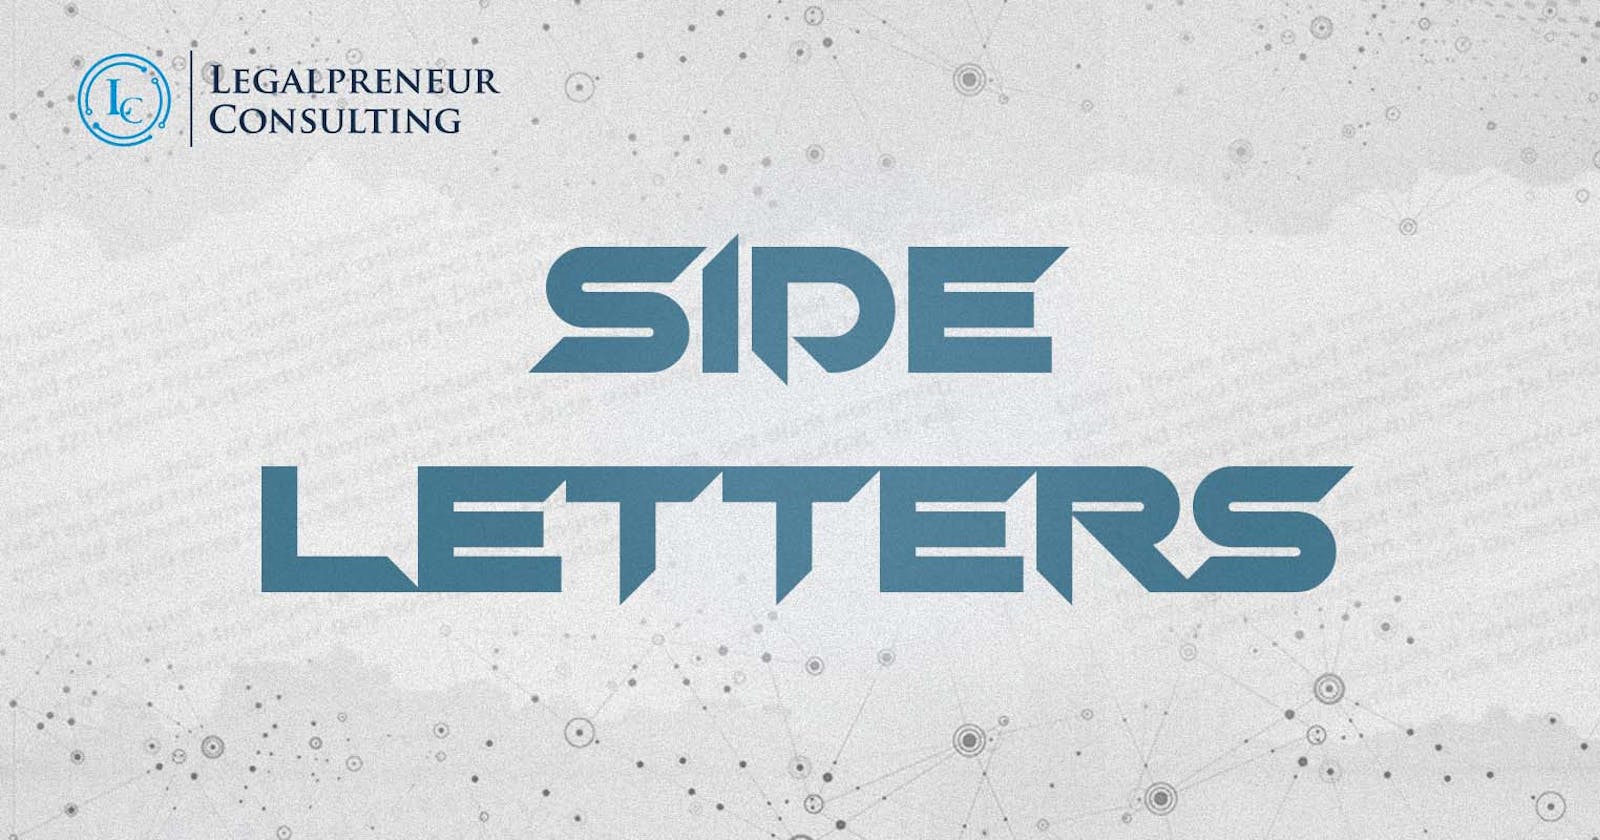 What is a Side Letter?